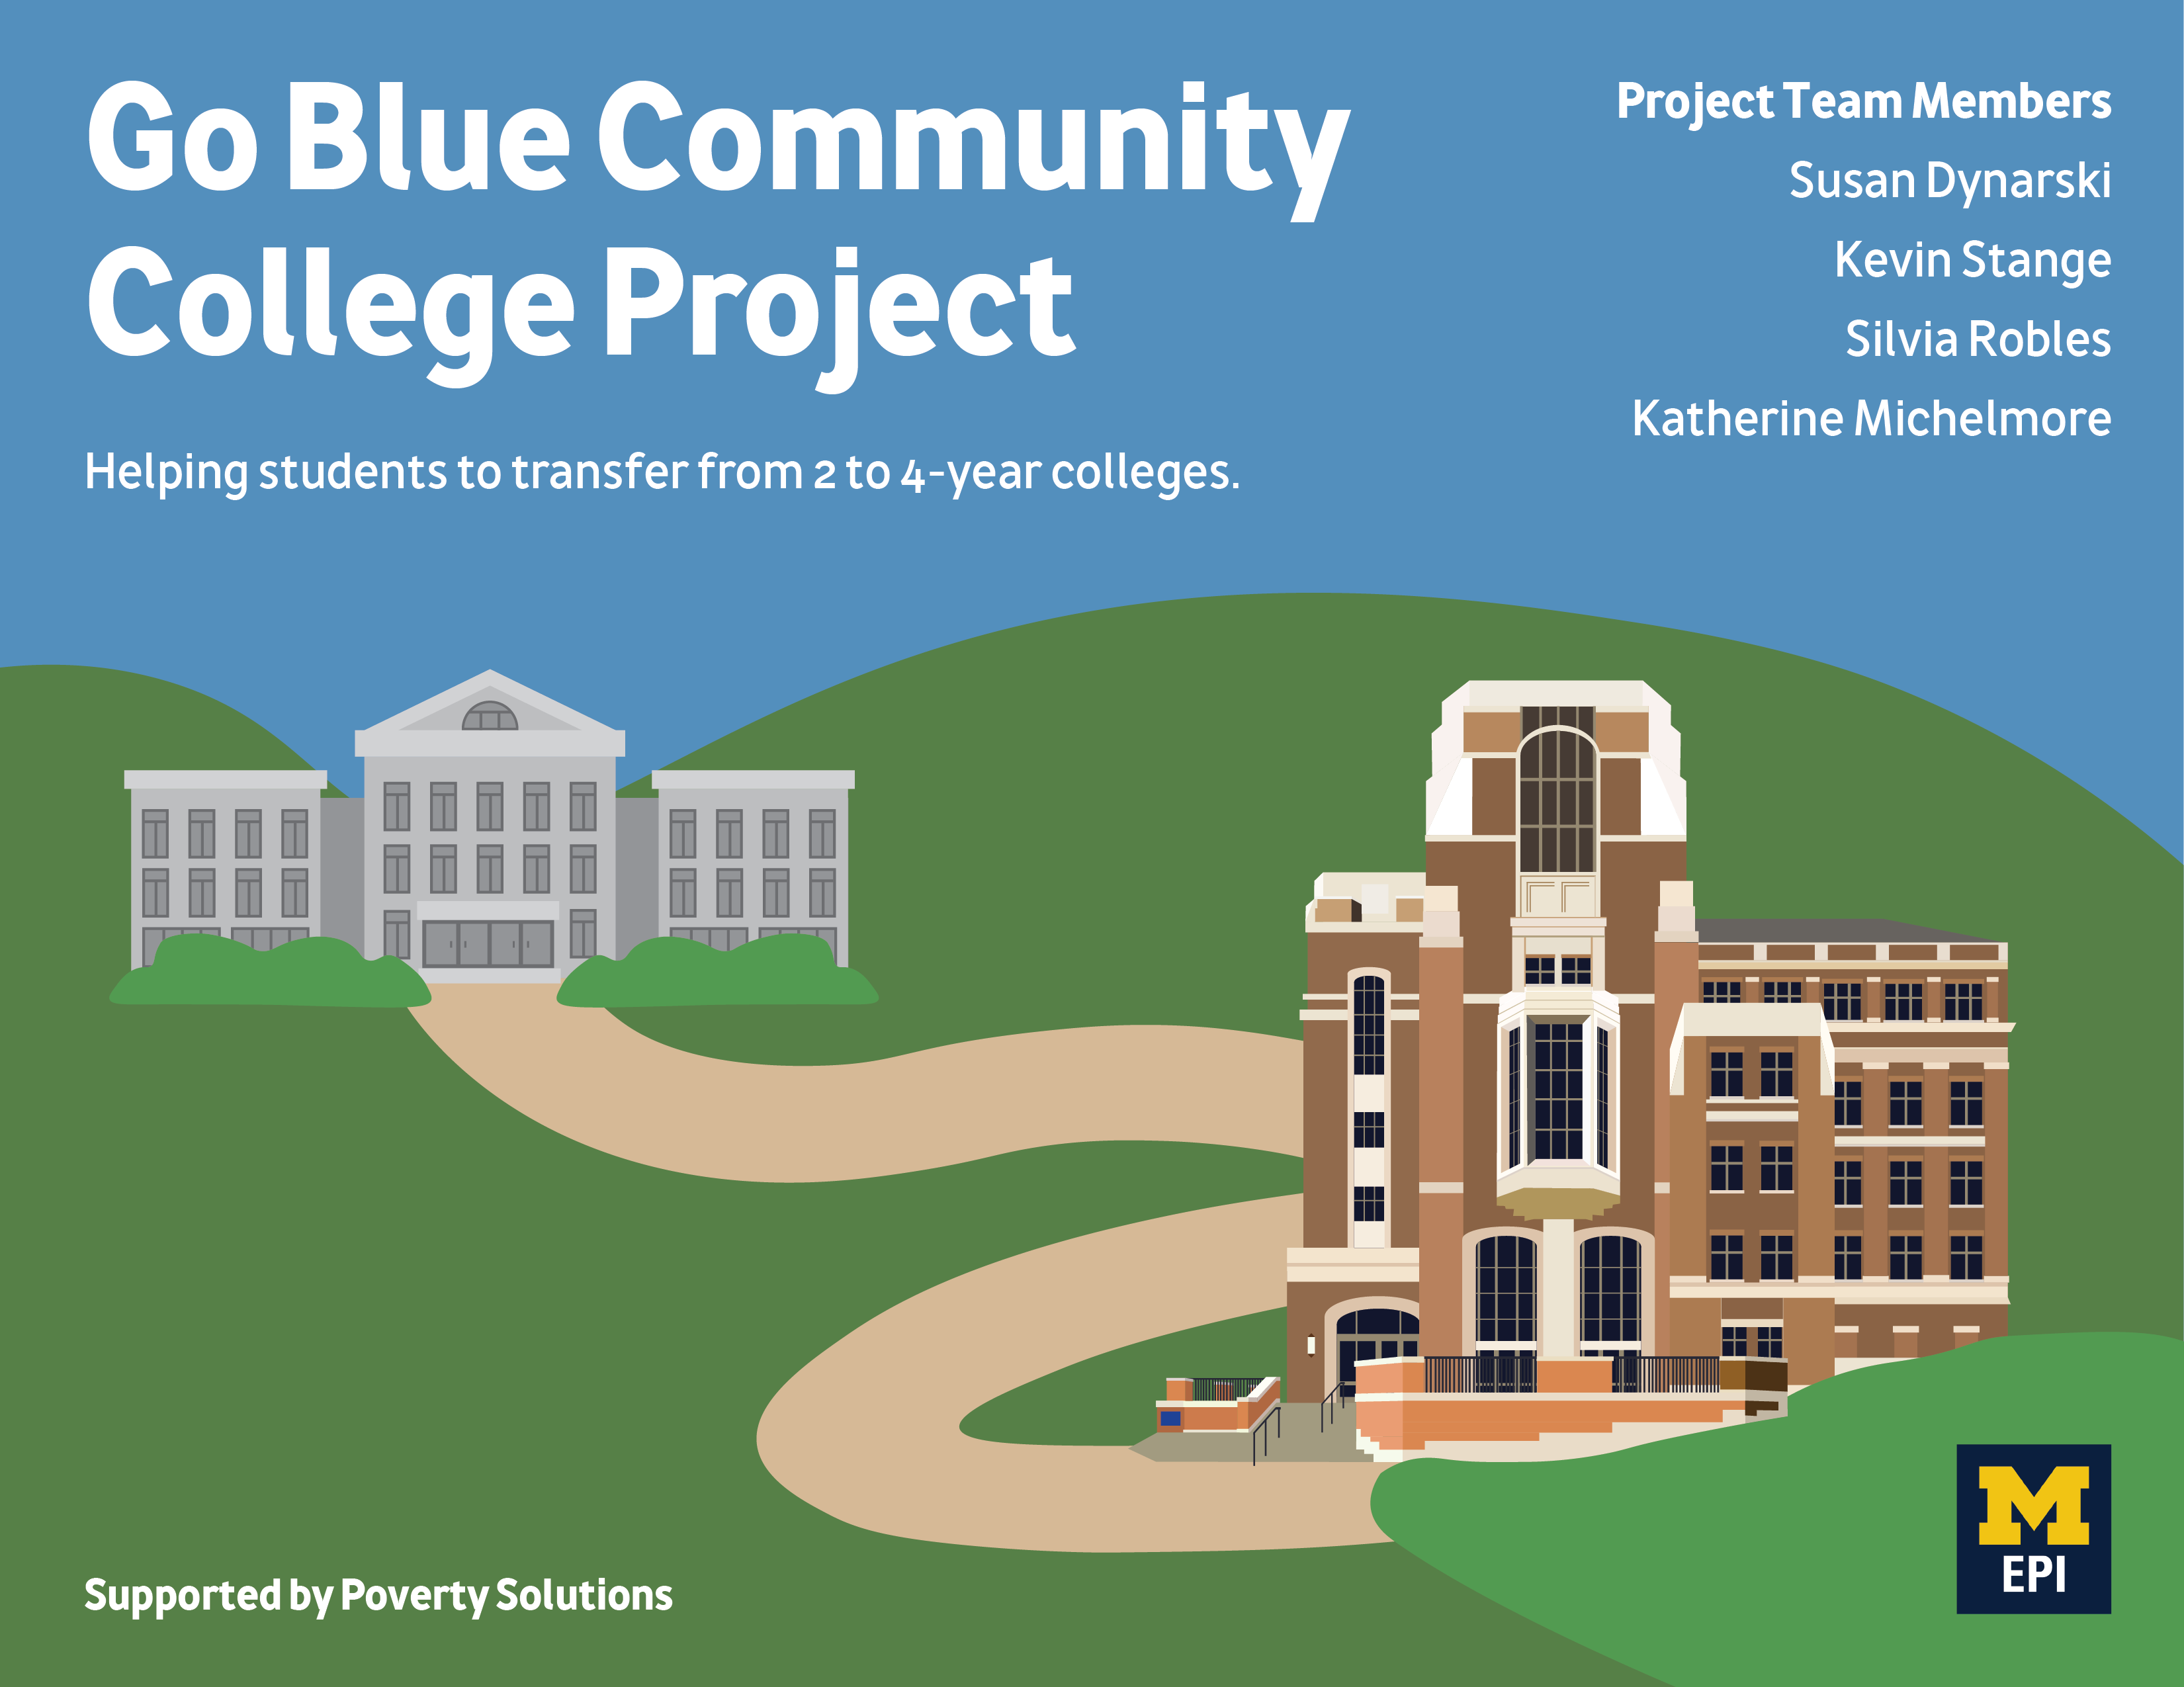 Go Blue Community College Project